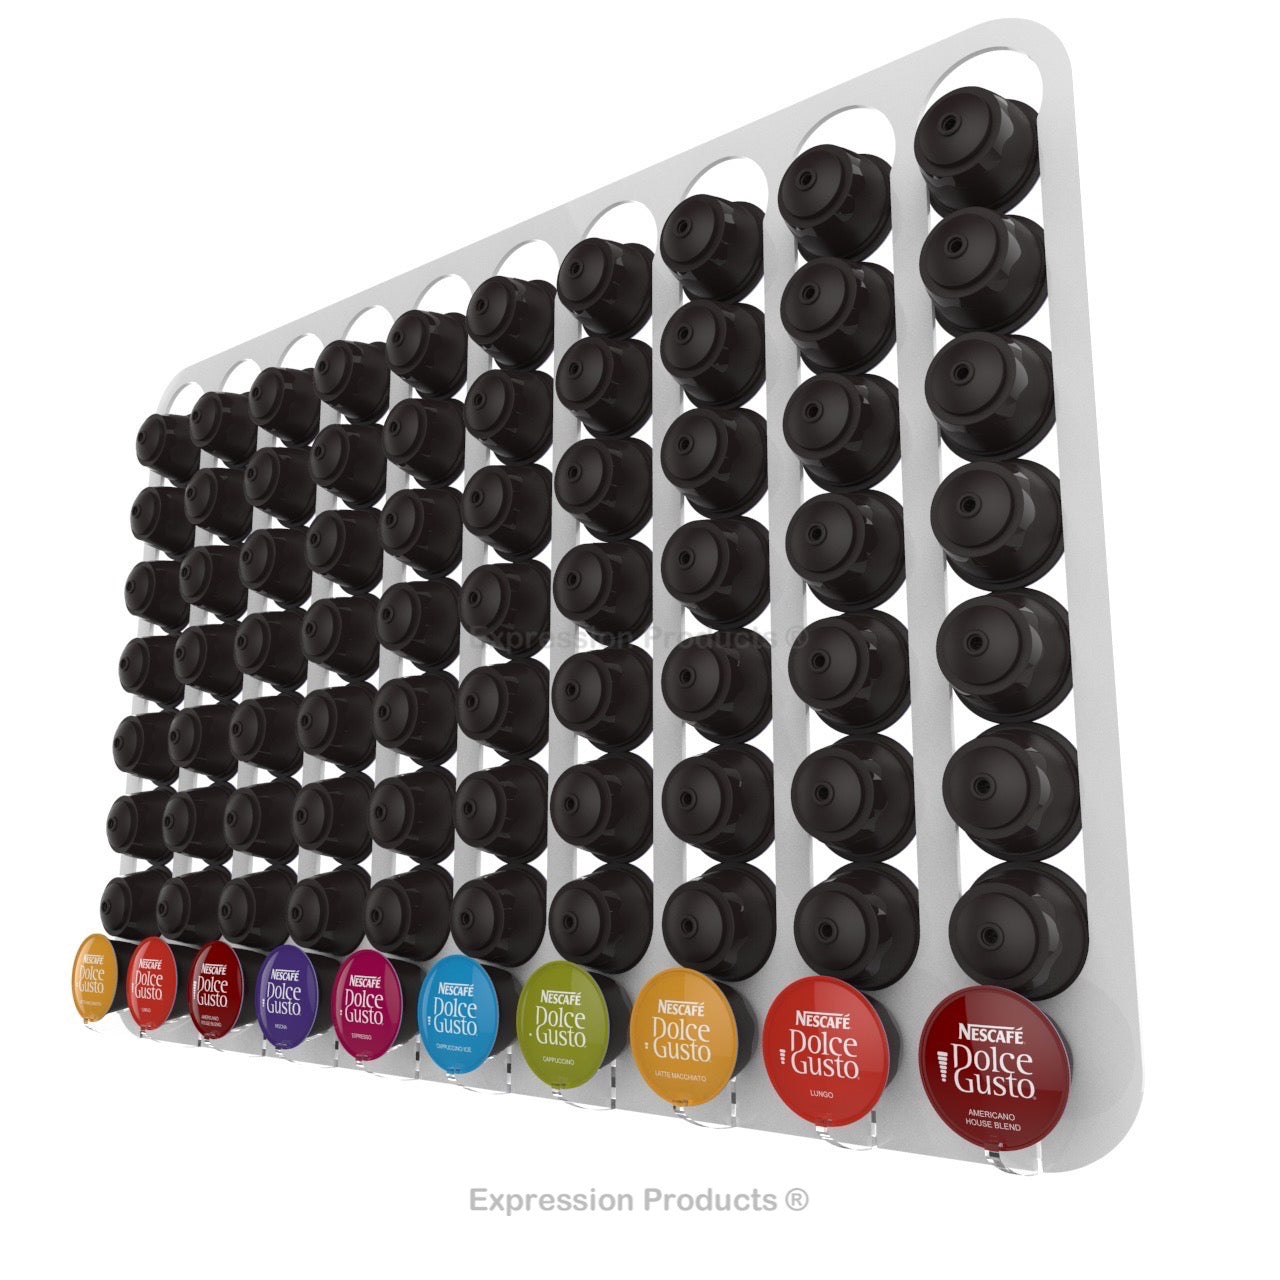 Dolce Gusto Coffee Pod Holder, Wall Mounted.  Shown in White Holding 80 Pods